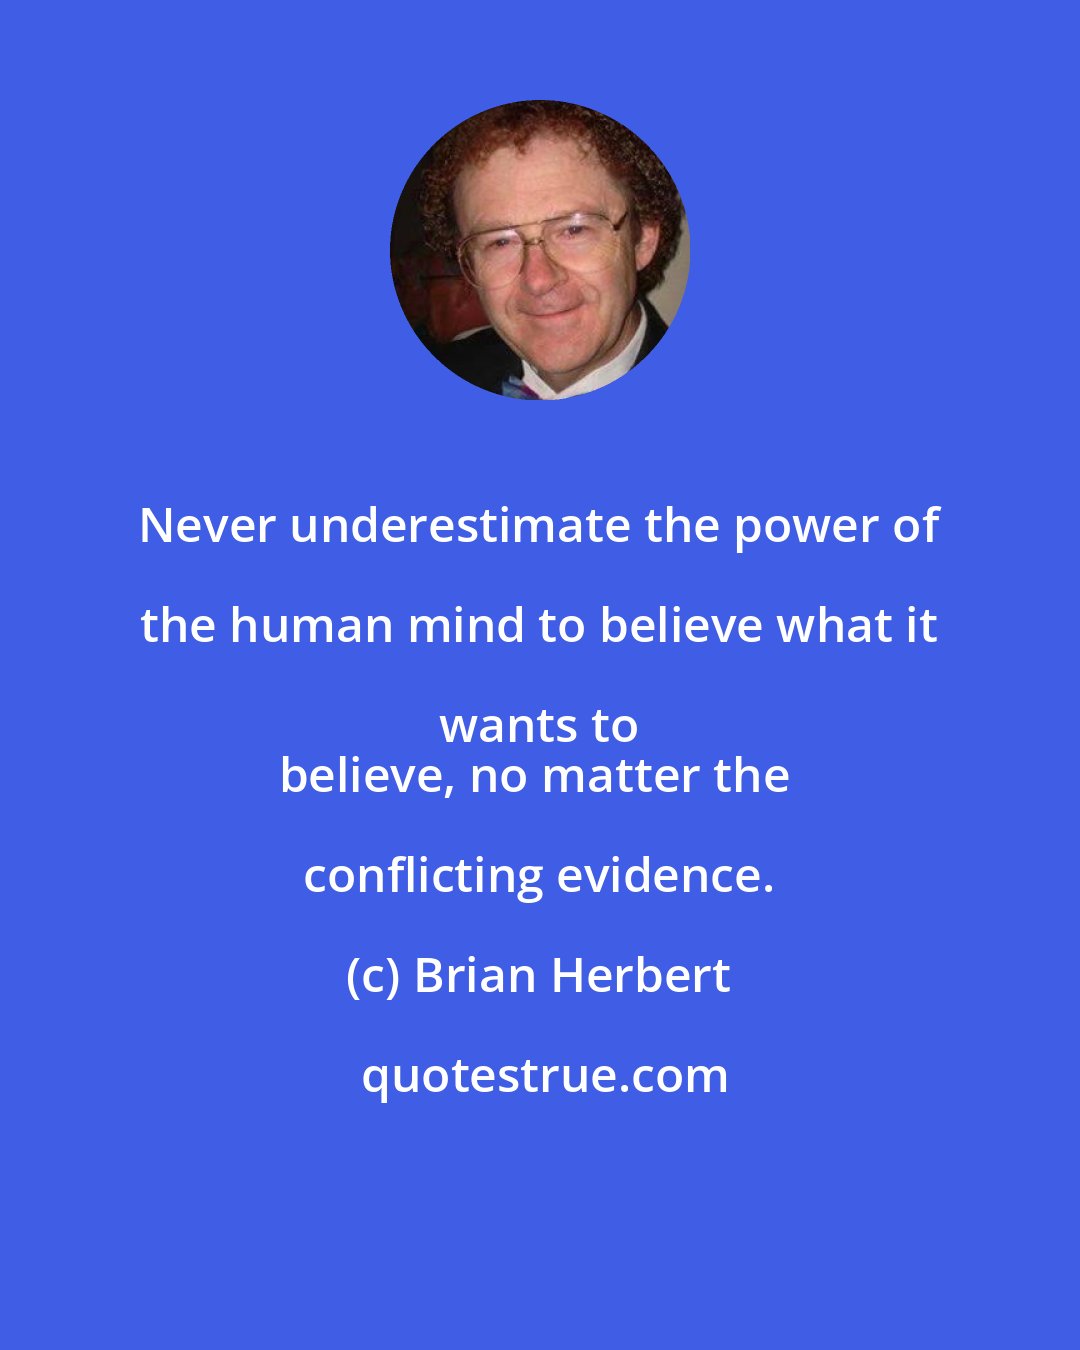 Brian Herbert: Never underestimate the power of the human mind to believe what it wants to 
believe, no matter the conflicting evidence.